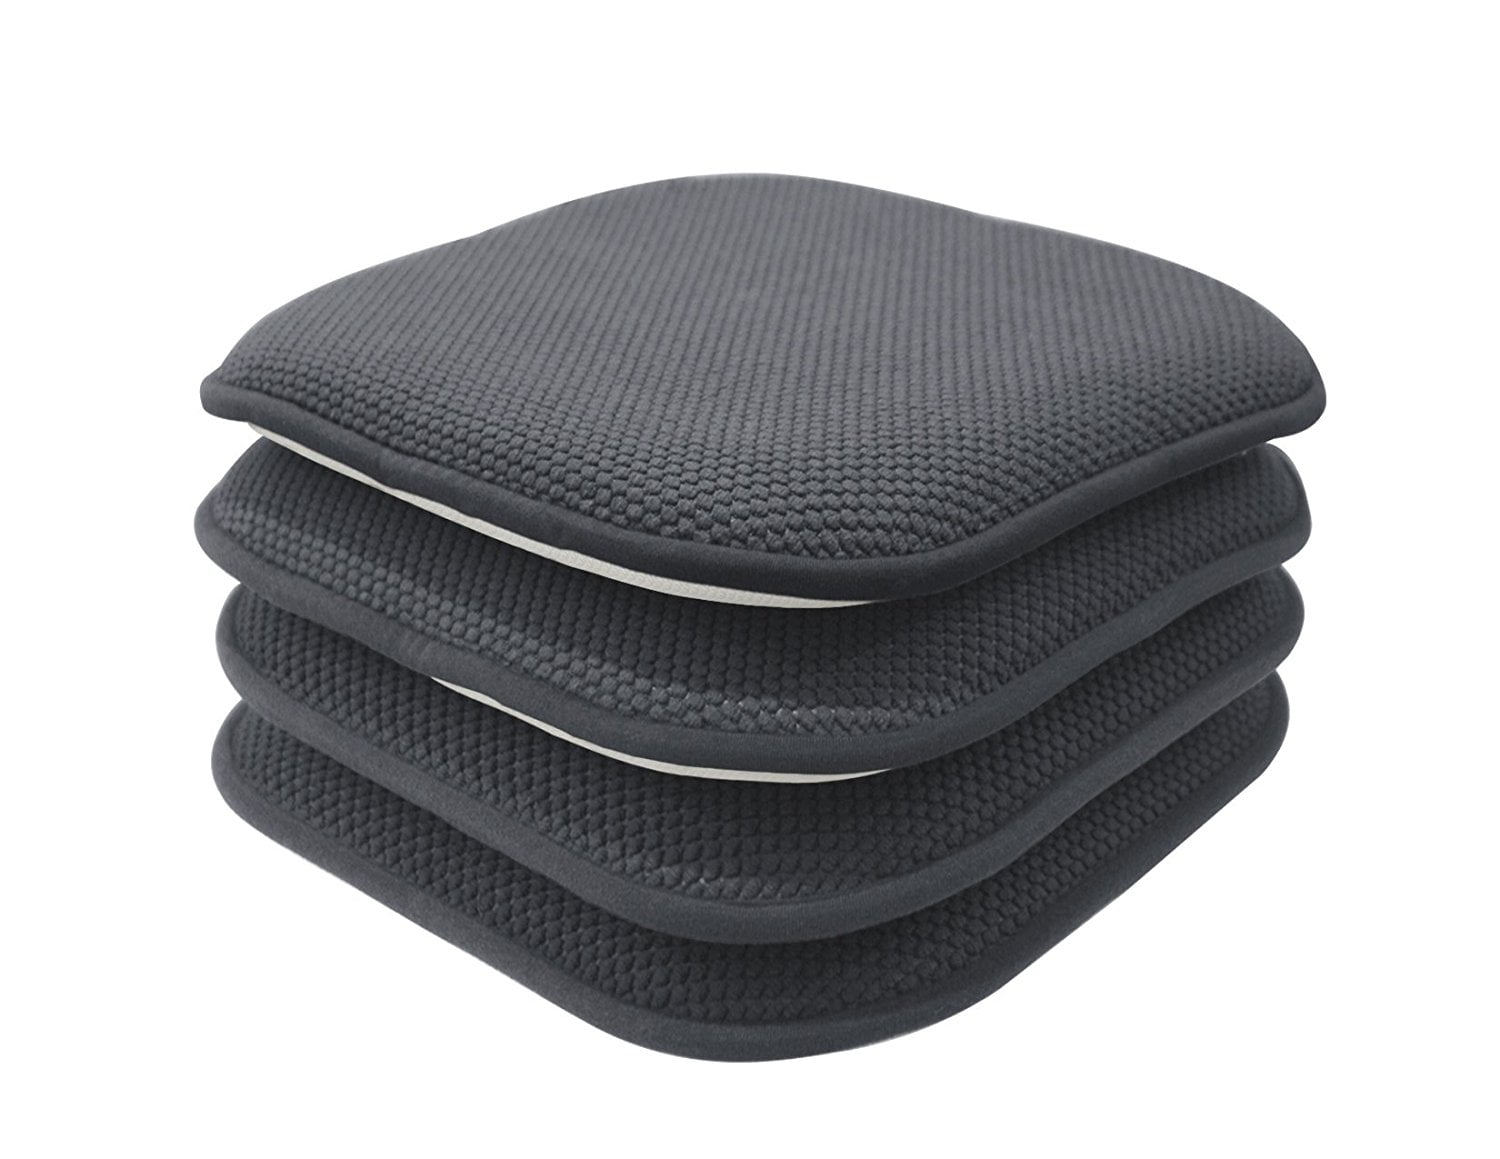 Wellsin Black Chair Cushions for Dining Chairs 4 Pack, Memory Foam